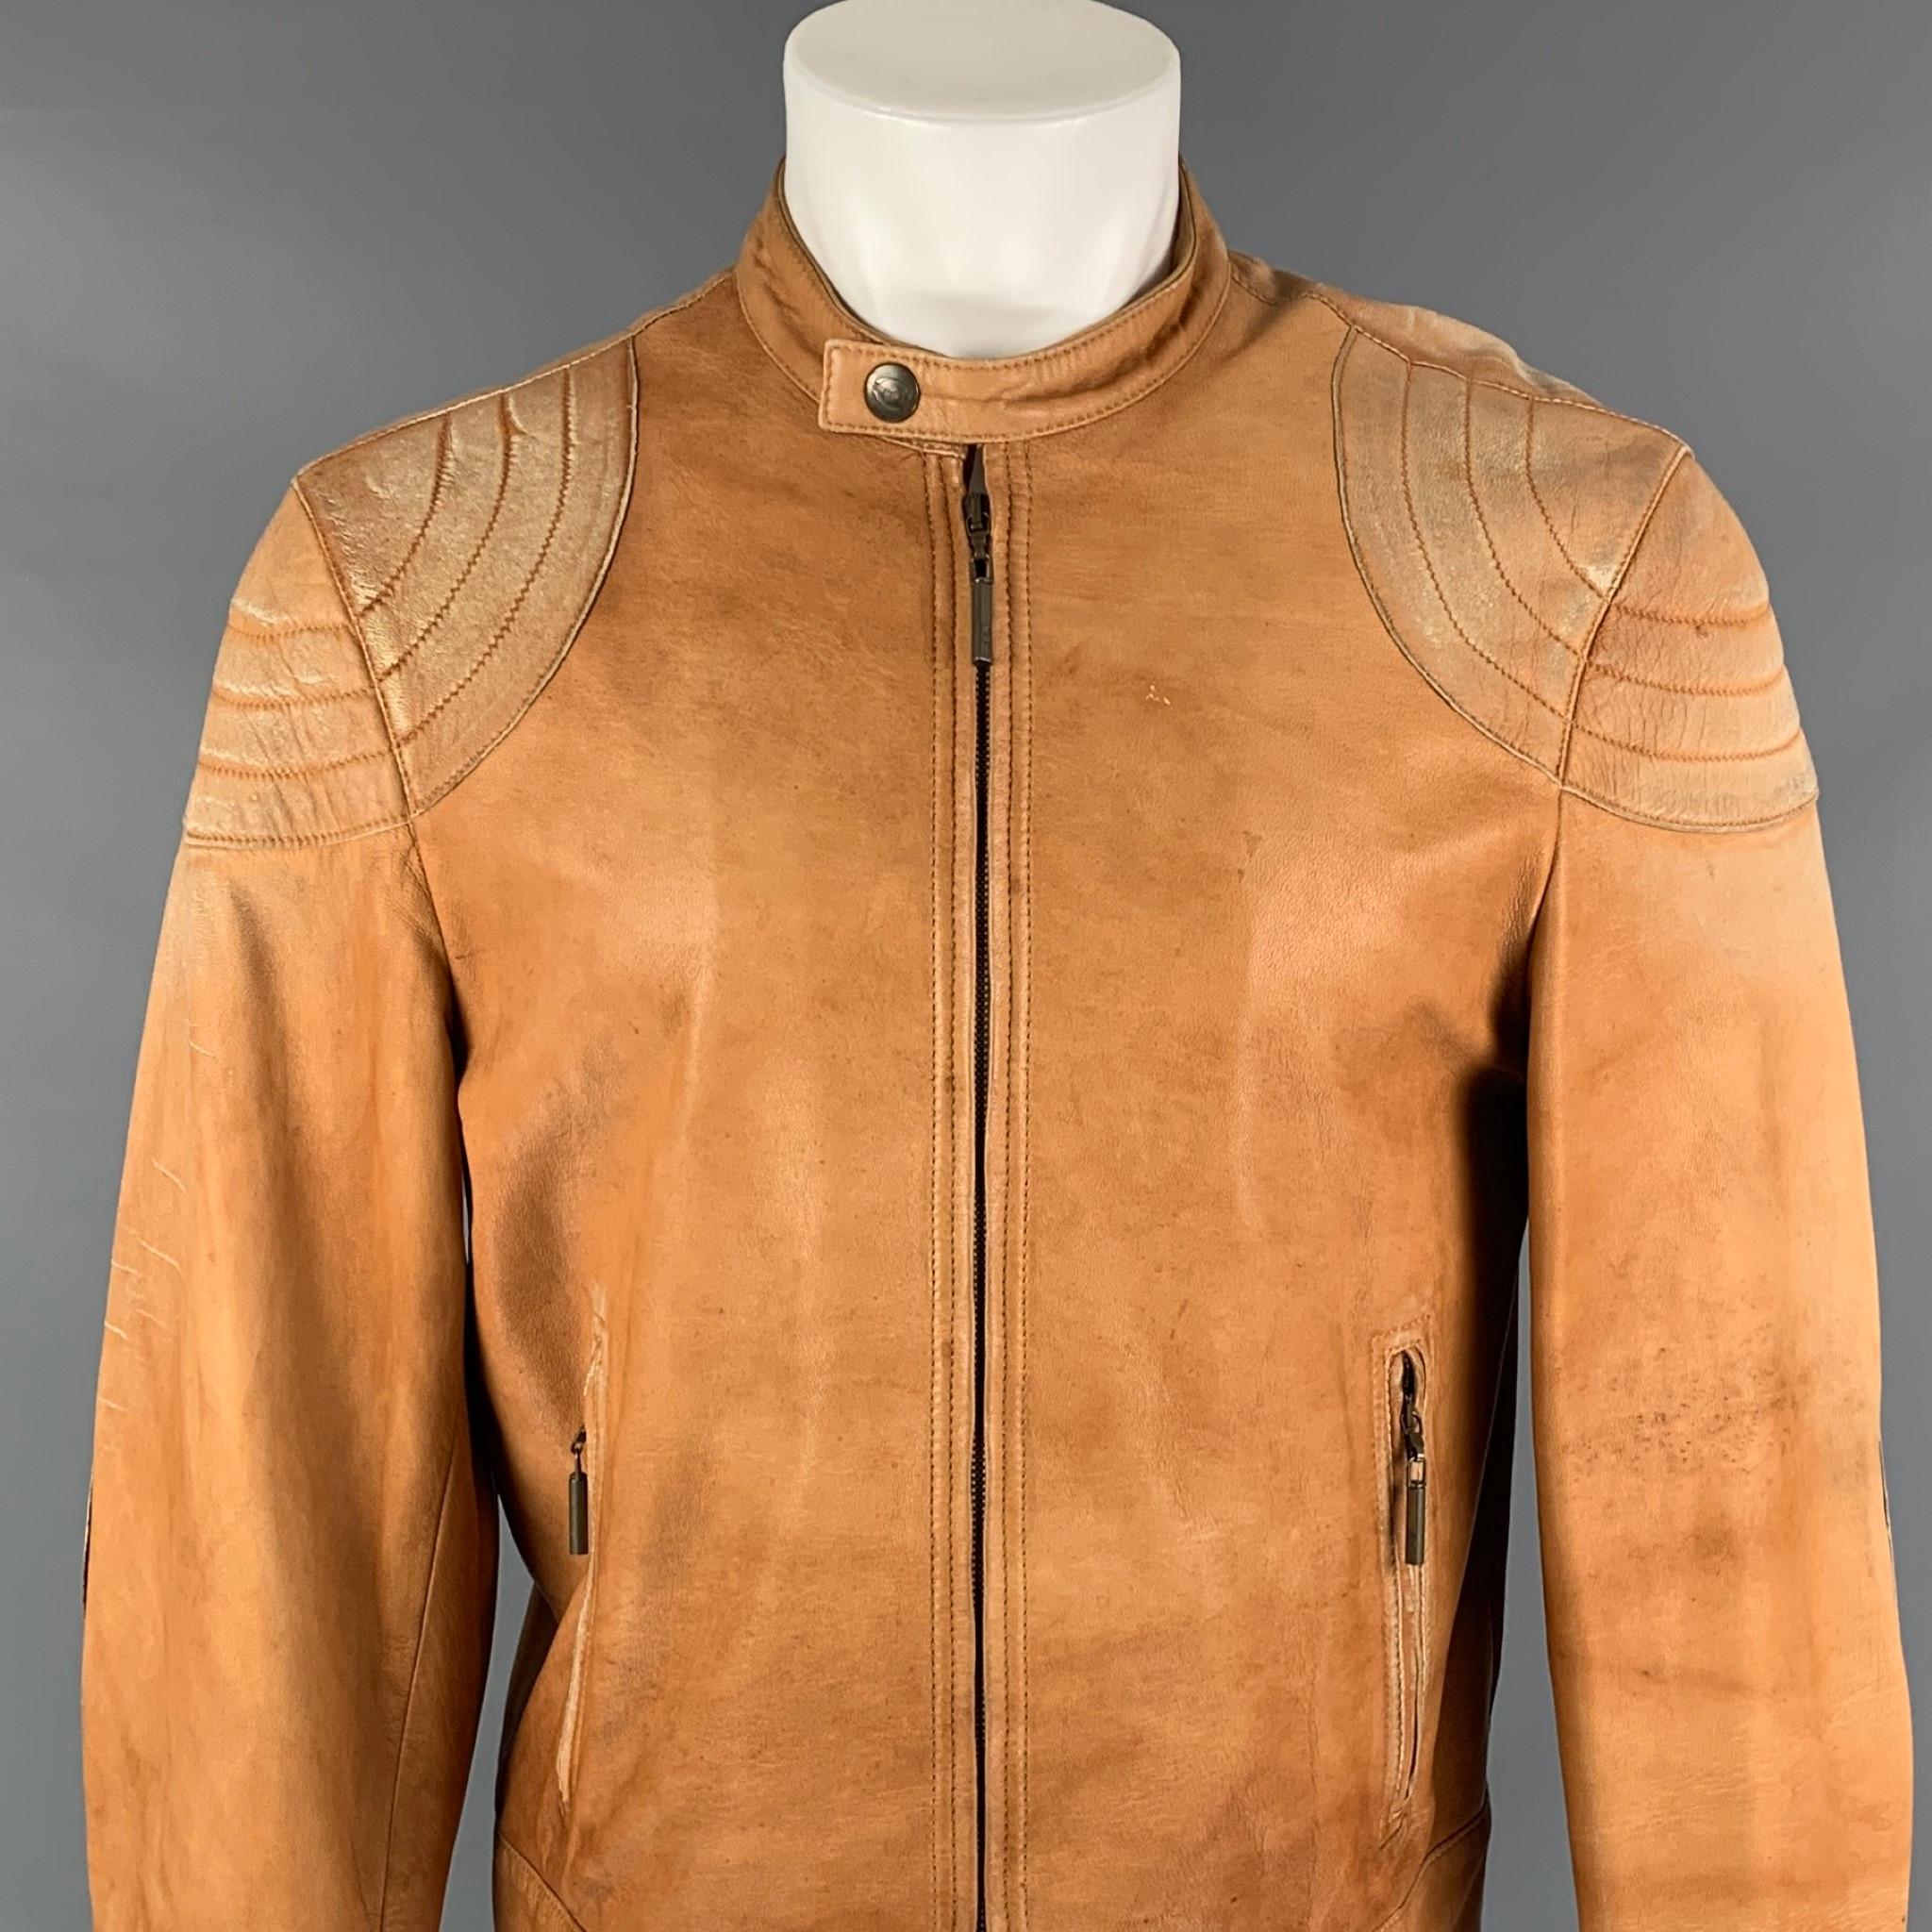 JUST CAVALLI jacket comes in a tan distressed leather featuring a biker style, elbow patches, zipper pocket,collar strap detail, and a full zip up closure.

Good Pre-Owned Condition.
Marked: 50

Measurements:

Shoulder: 18.5 in.
Chest: 40